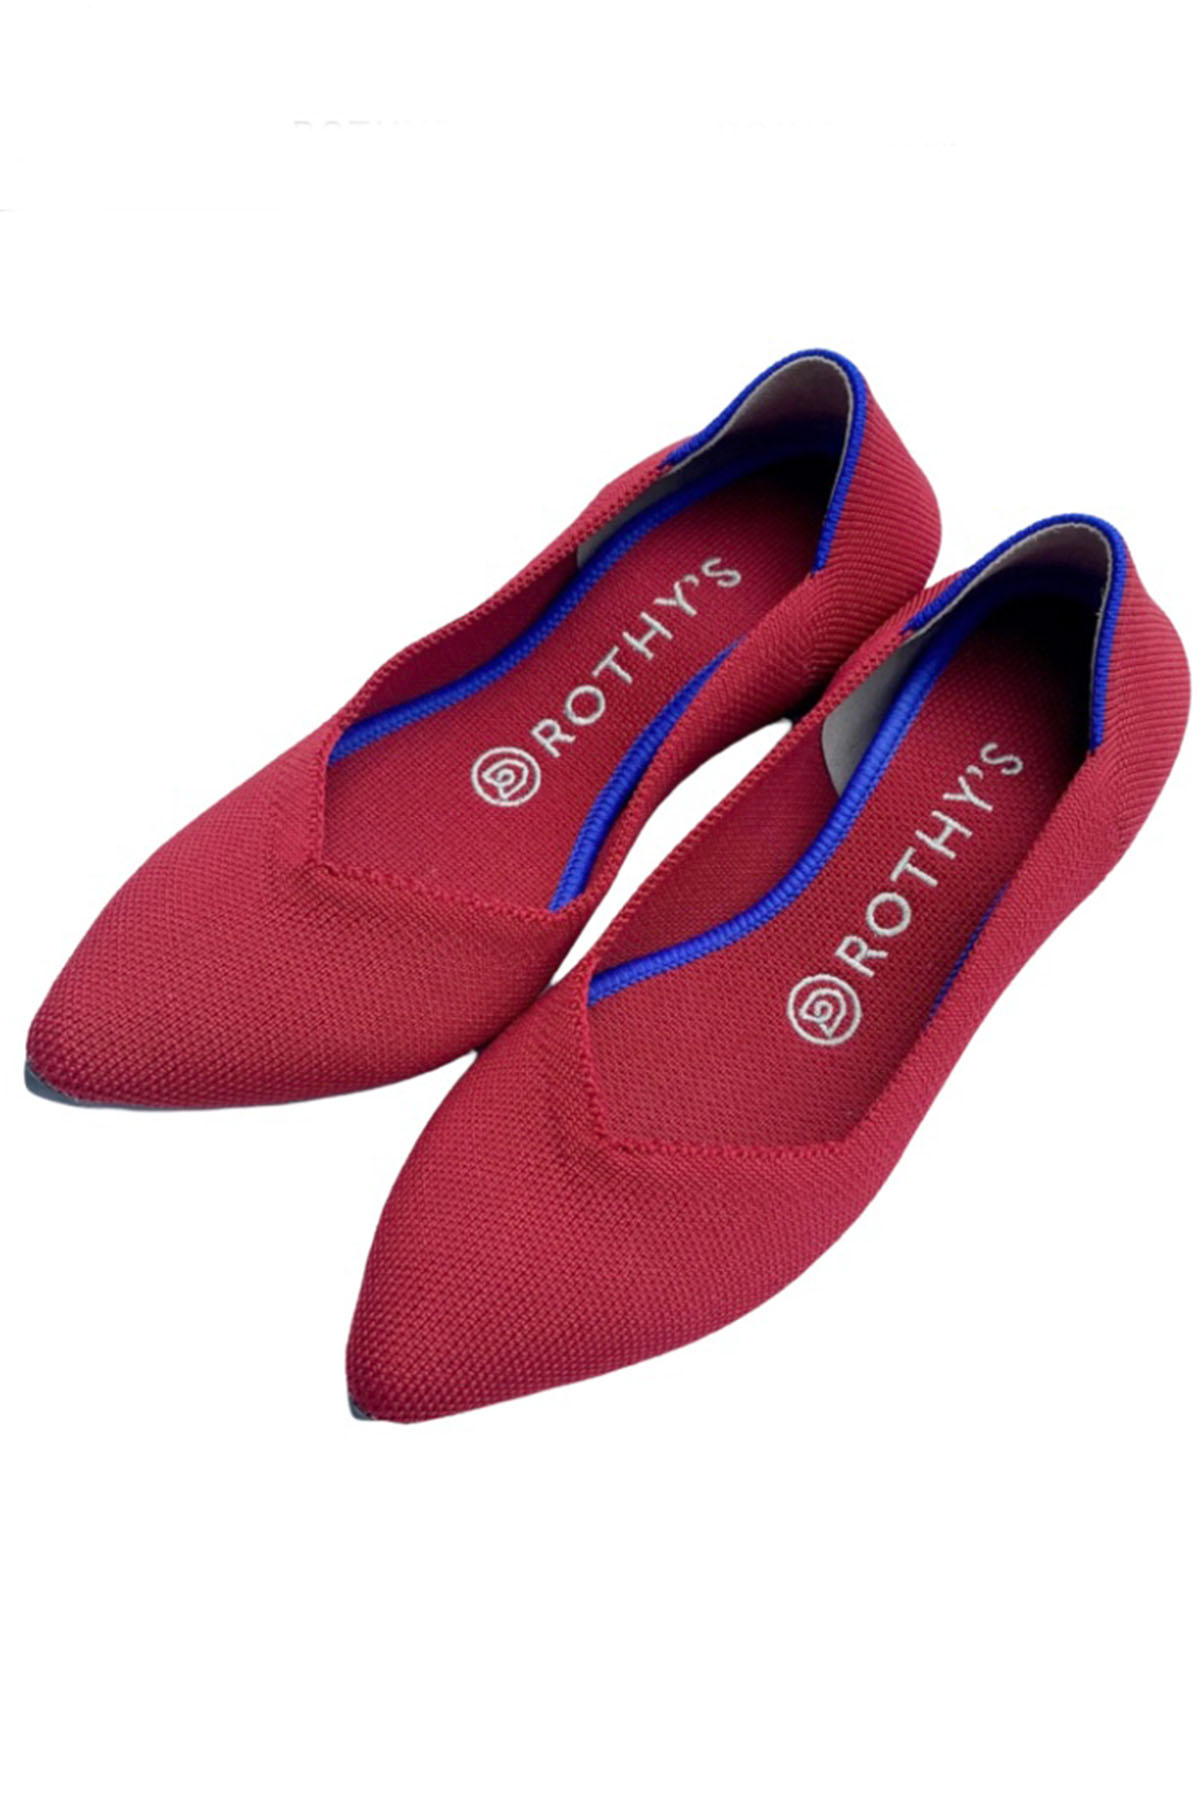 pair of red rothy's casual flat shoes.